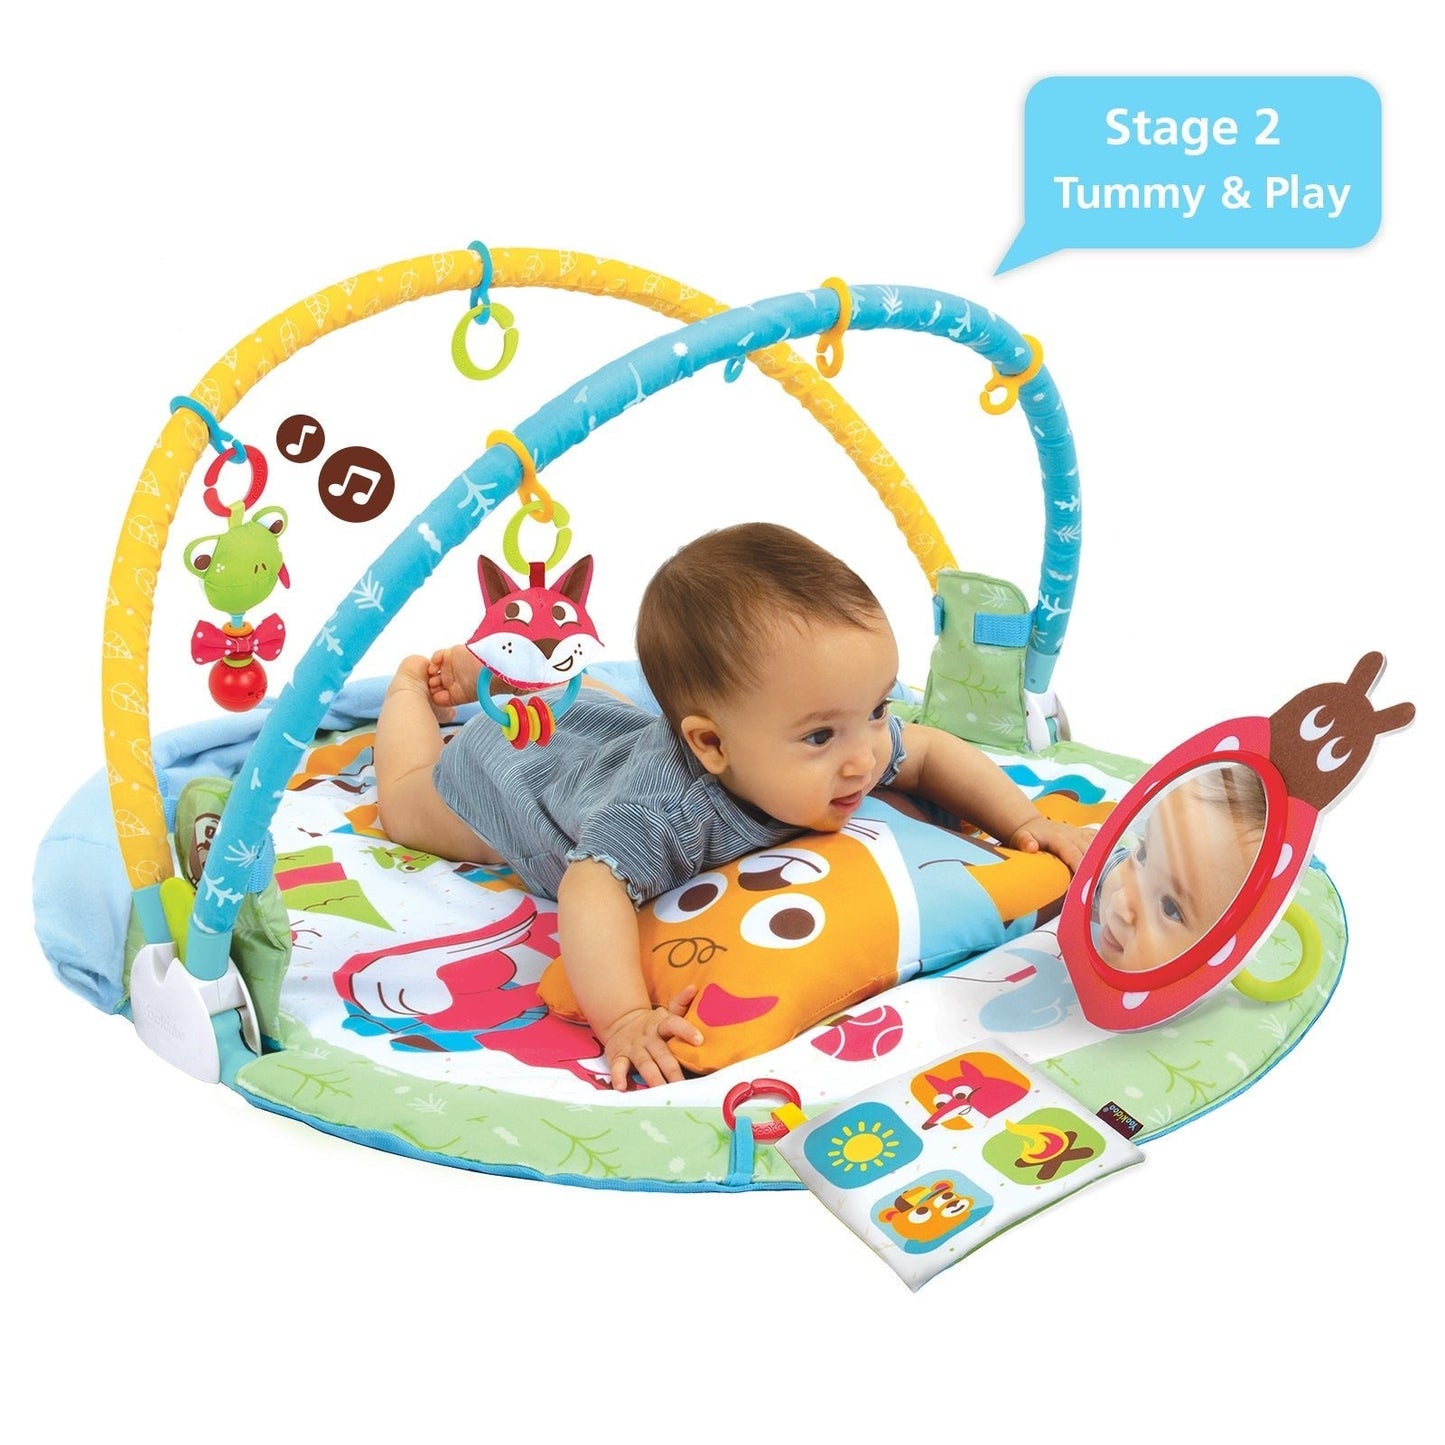 Gymotion® Play ‘N’ Nap™ - Little Kids Business